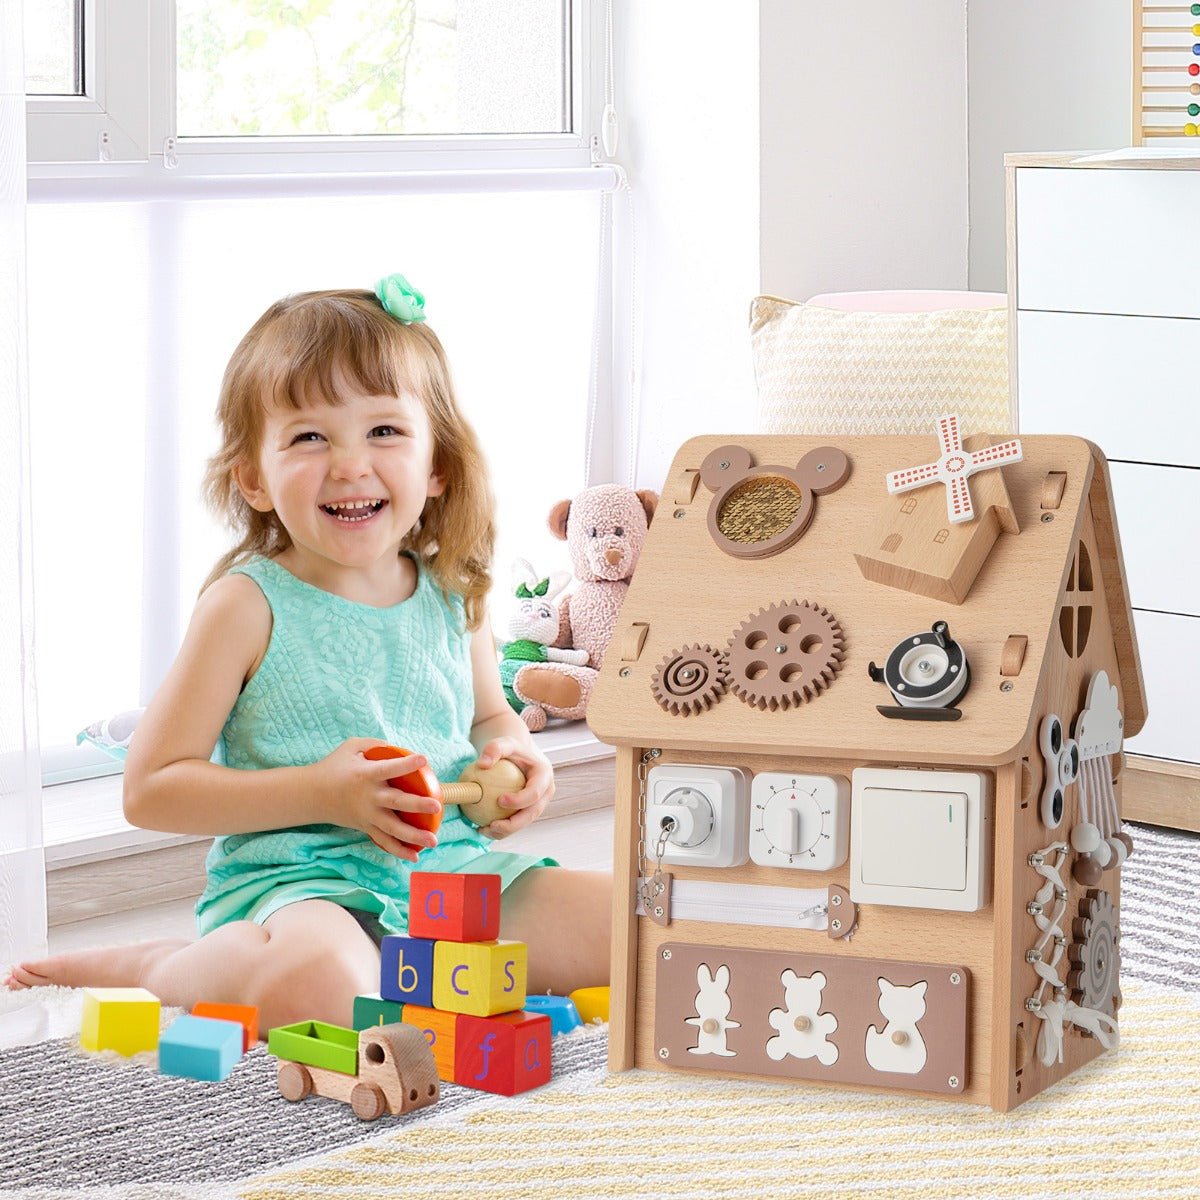 Safe and Exciting Playtime with Busy House Playset